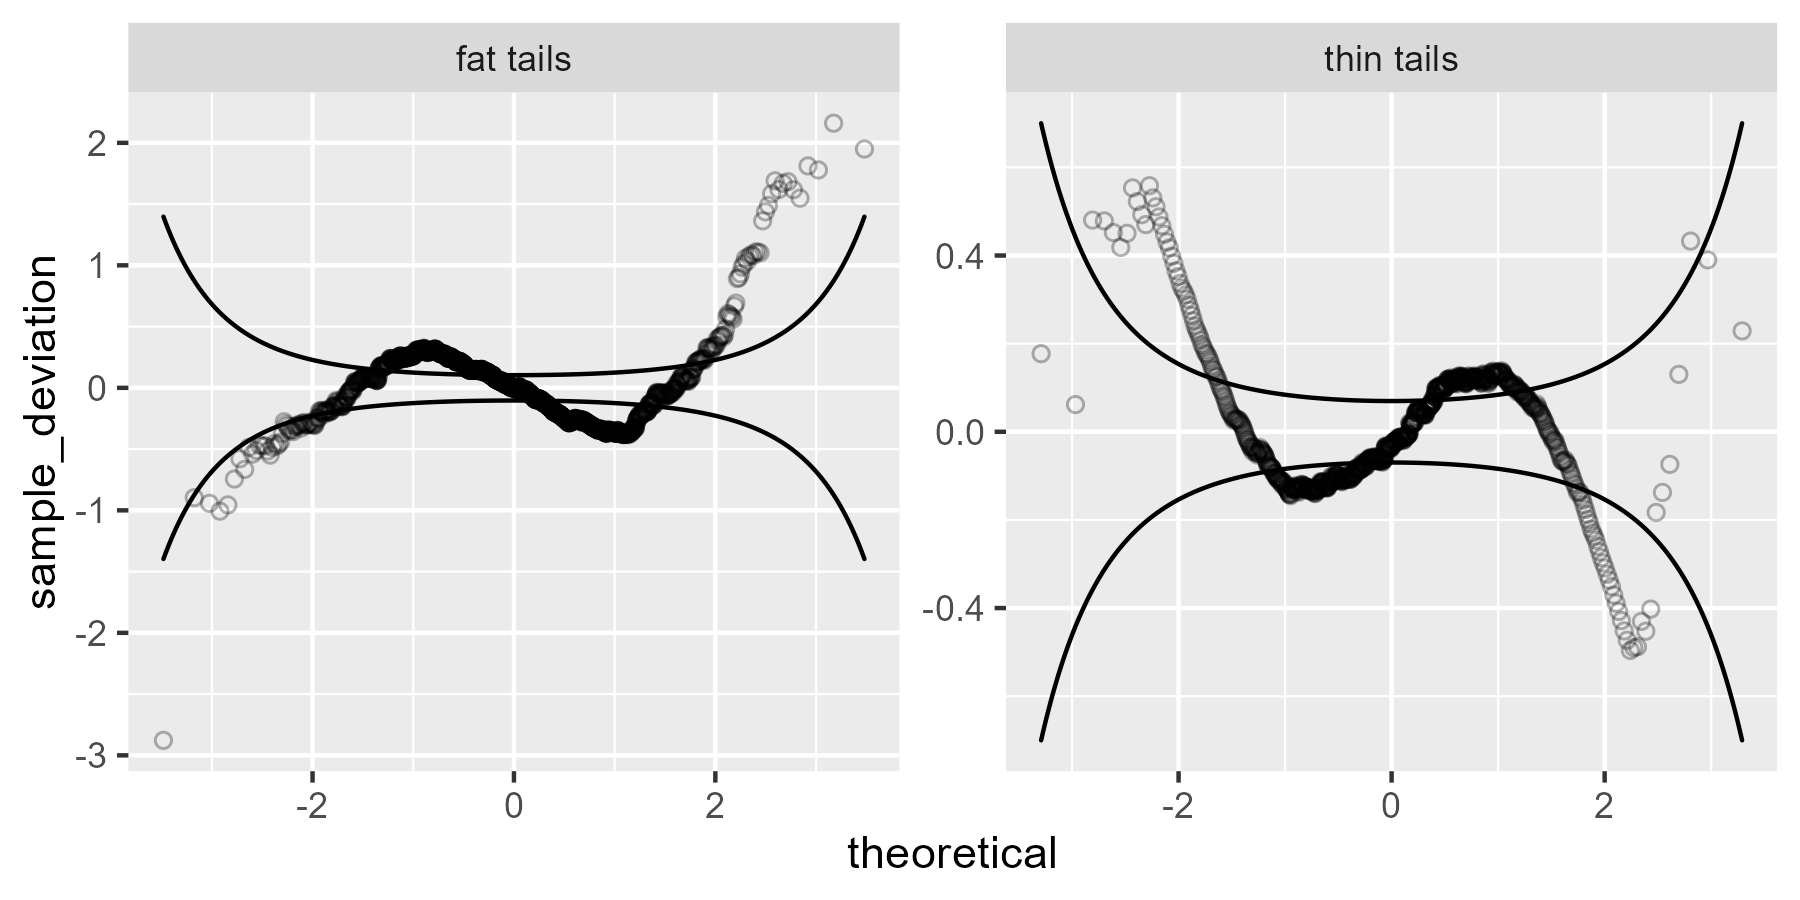 A worm plot for fail tailed and thin tailed data.